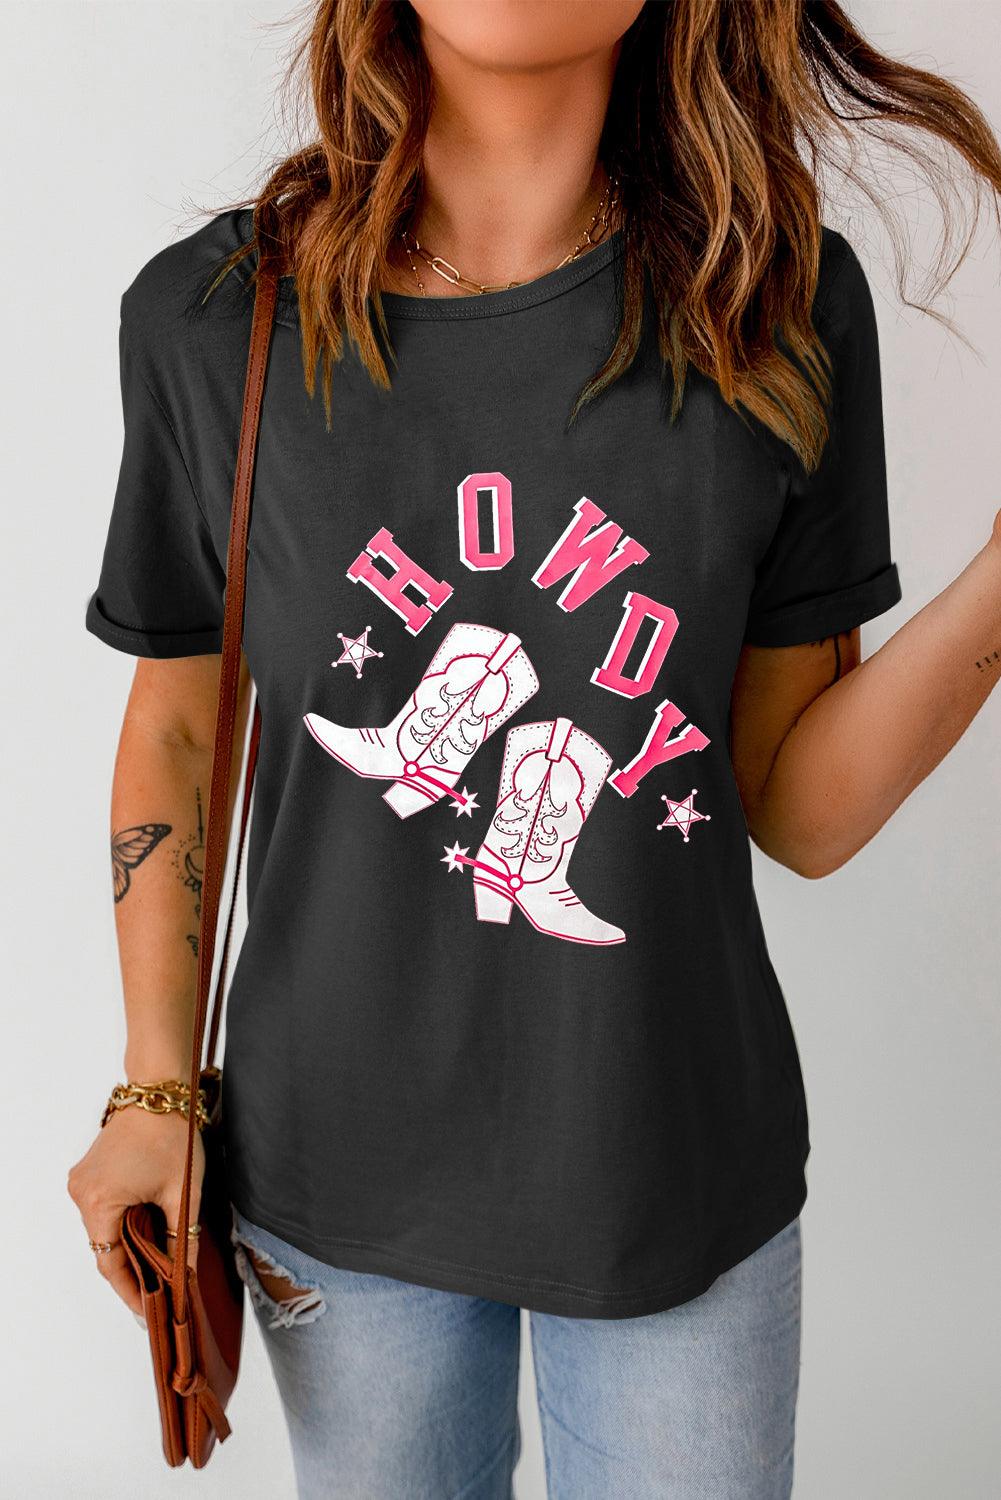 HOWDY Cowboy Boots Graphic Tee - Flyclothing LLC